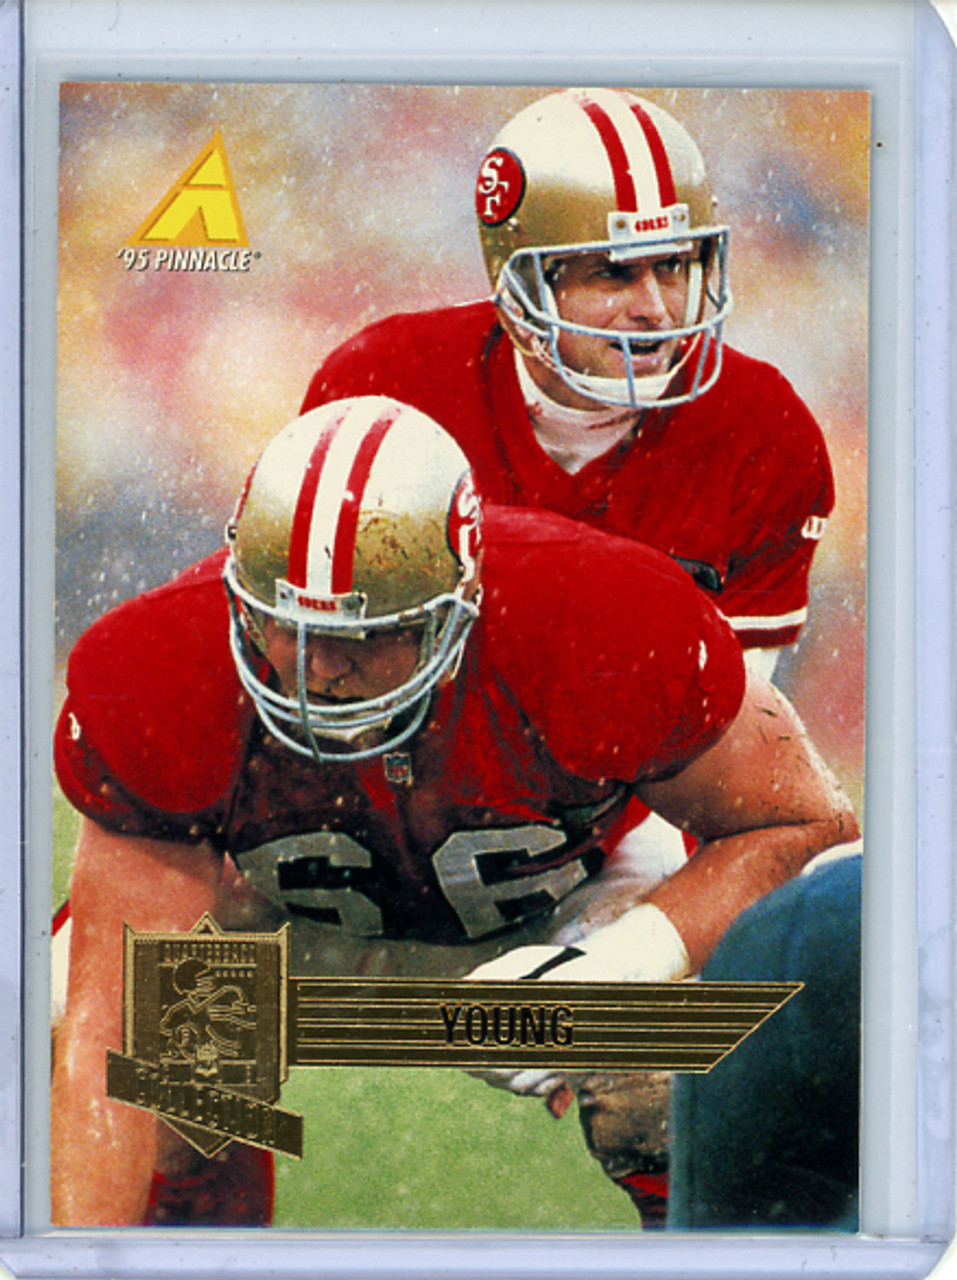 Steve Young 1995 Pinnacle Club Collection #3 (CQ)